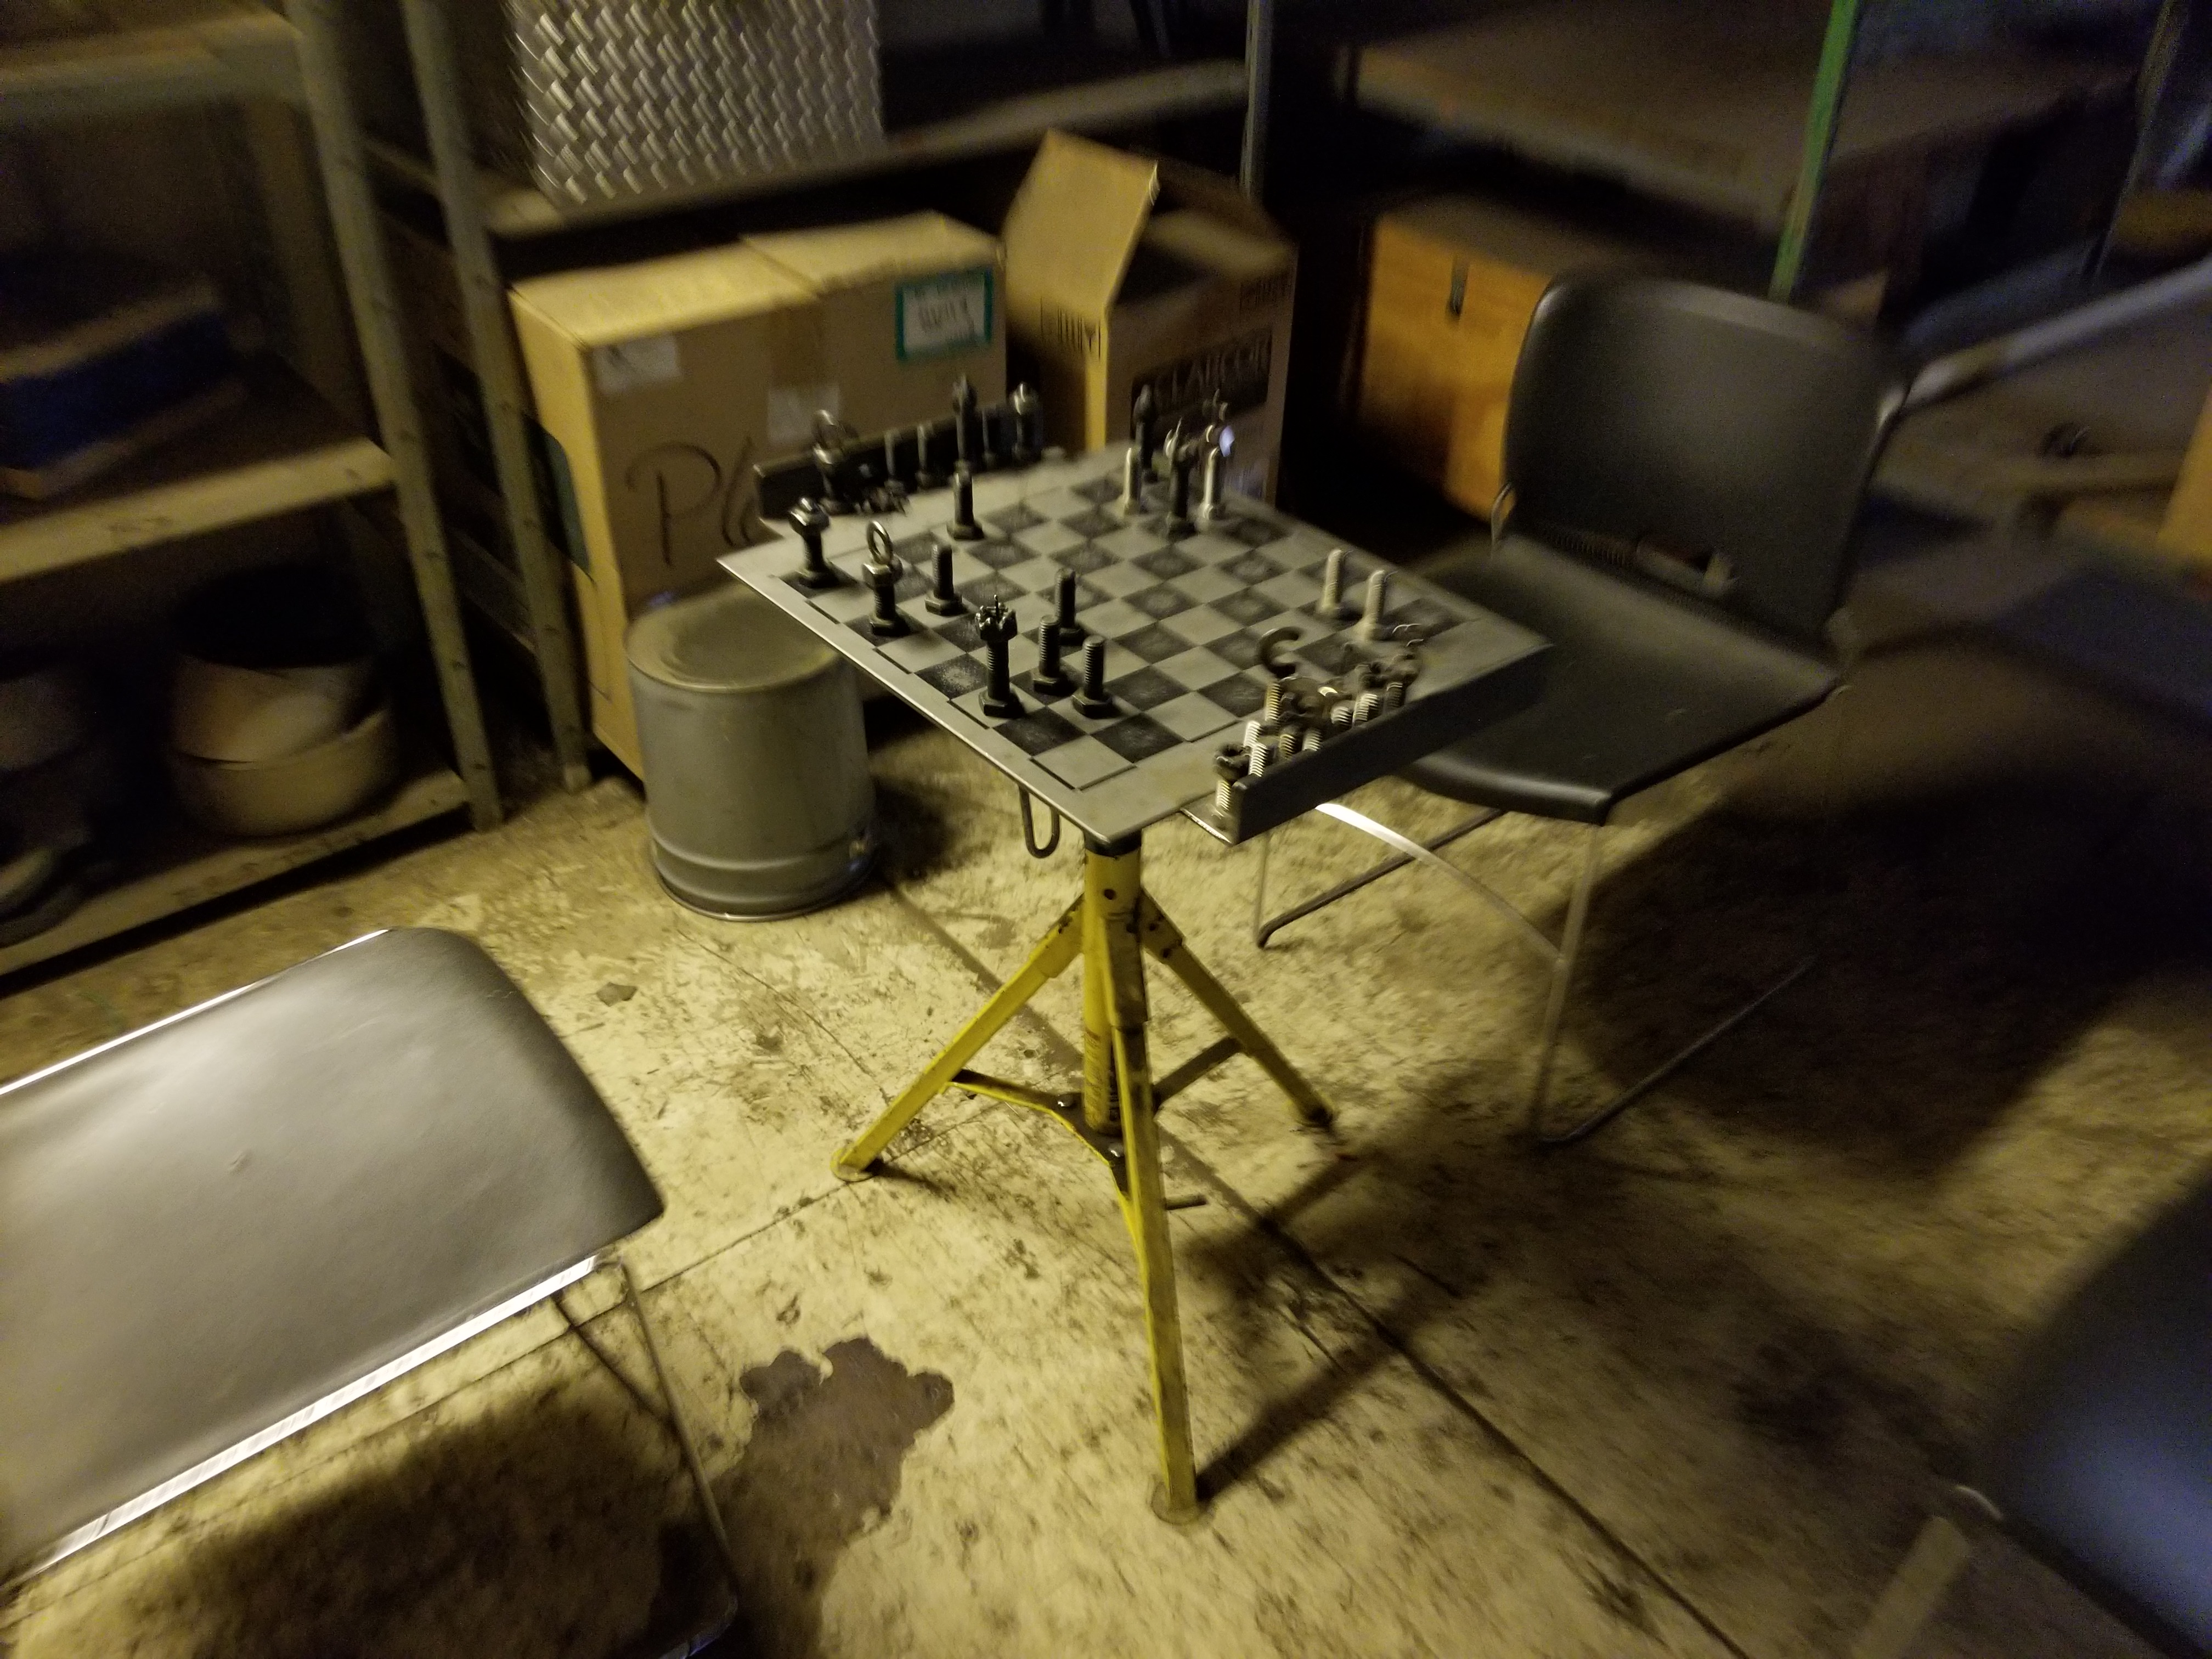 It turns out a couple of the old welders needed a spot to relax, away from the constant noise and distractions. They discovered this little hideaeway and have been playing chess, on a handmade set, daily for the past 20 years.